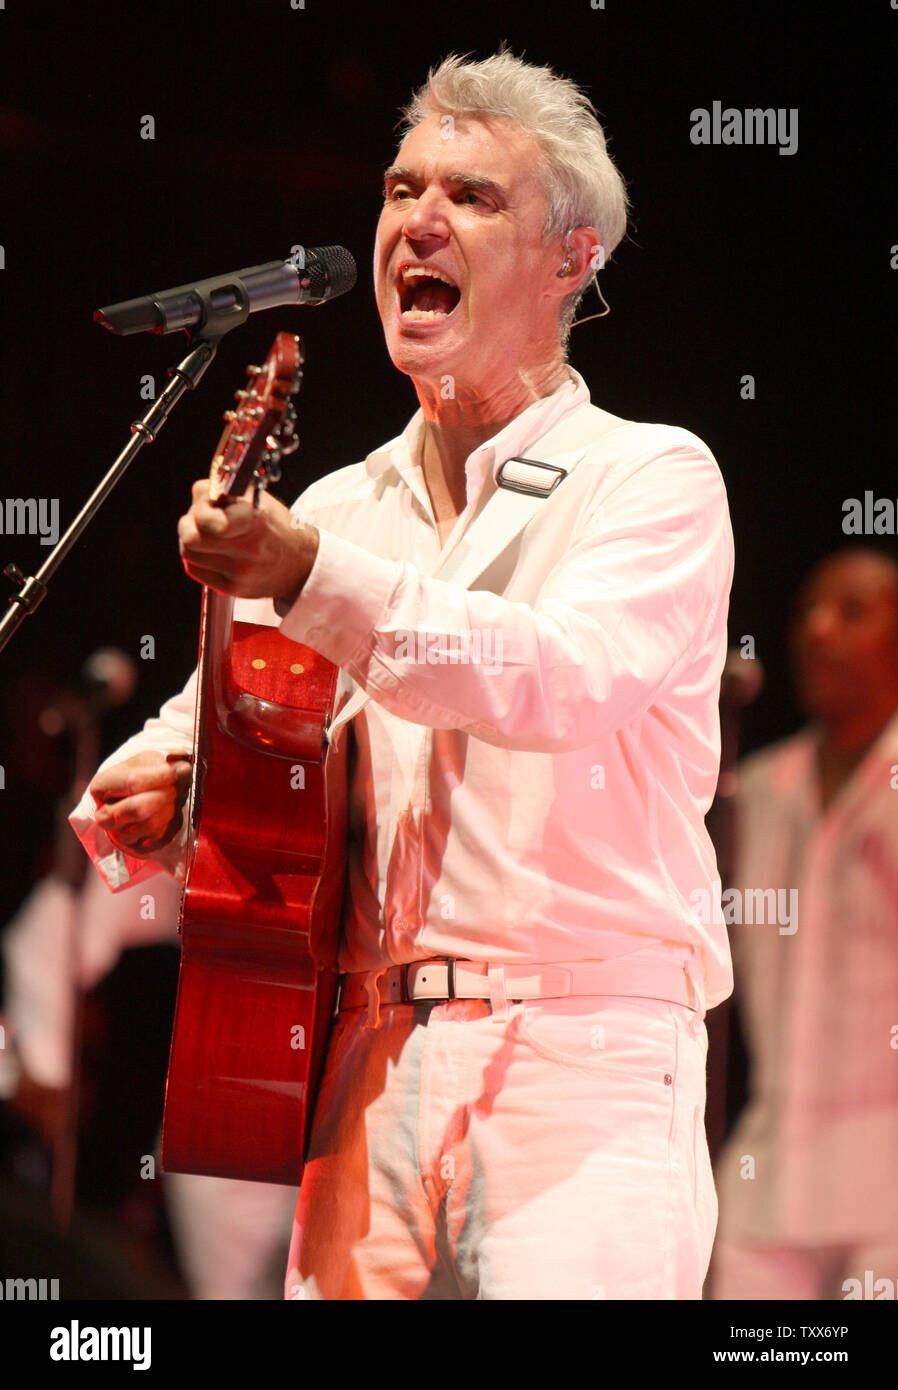 David Byrne performs at the Uptown Theatre in Kansas City, Missouri on October 19, 2008. The former lead singer of The Talking Heads is touring in support of his upcoming CD 'Everything That Happens Will Happen Today' which was co-written with Brian Eno. (UPI Photo/Daniel Gluskoter) Stock Photo